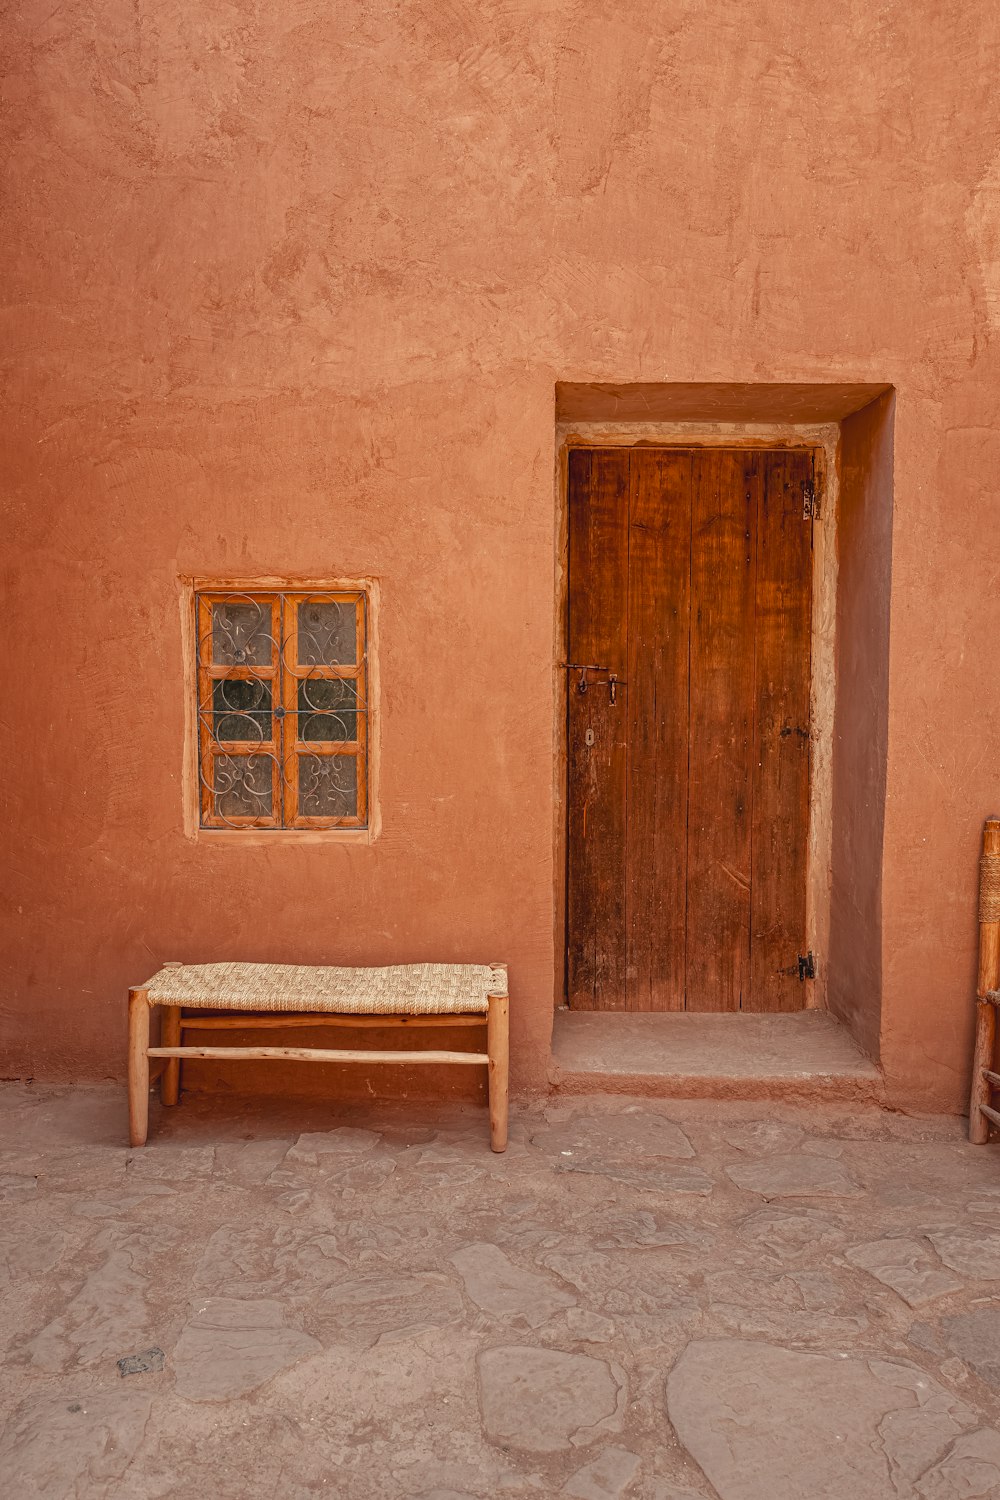 a wooden bench sitting in front of a brown building